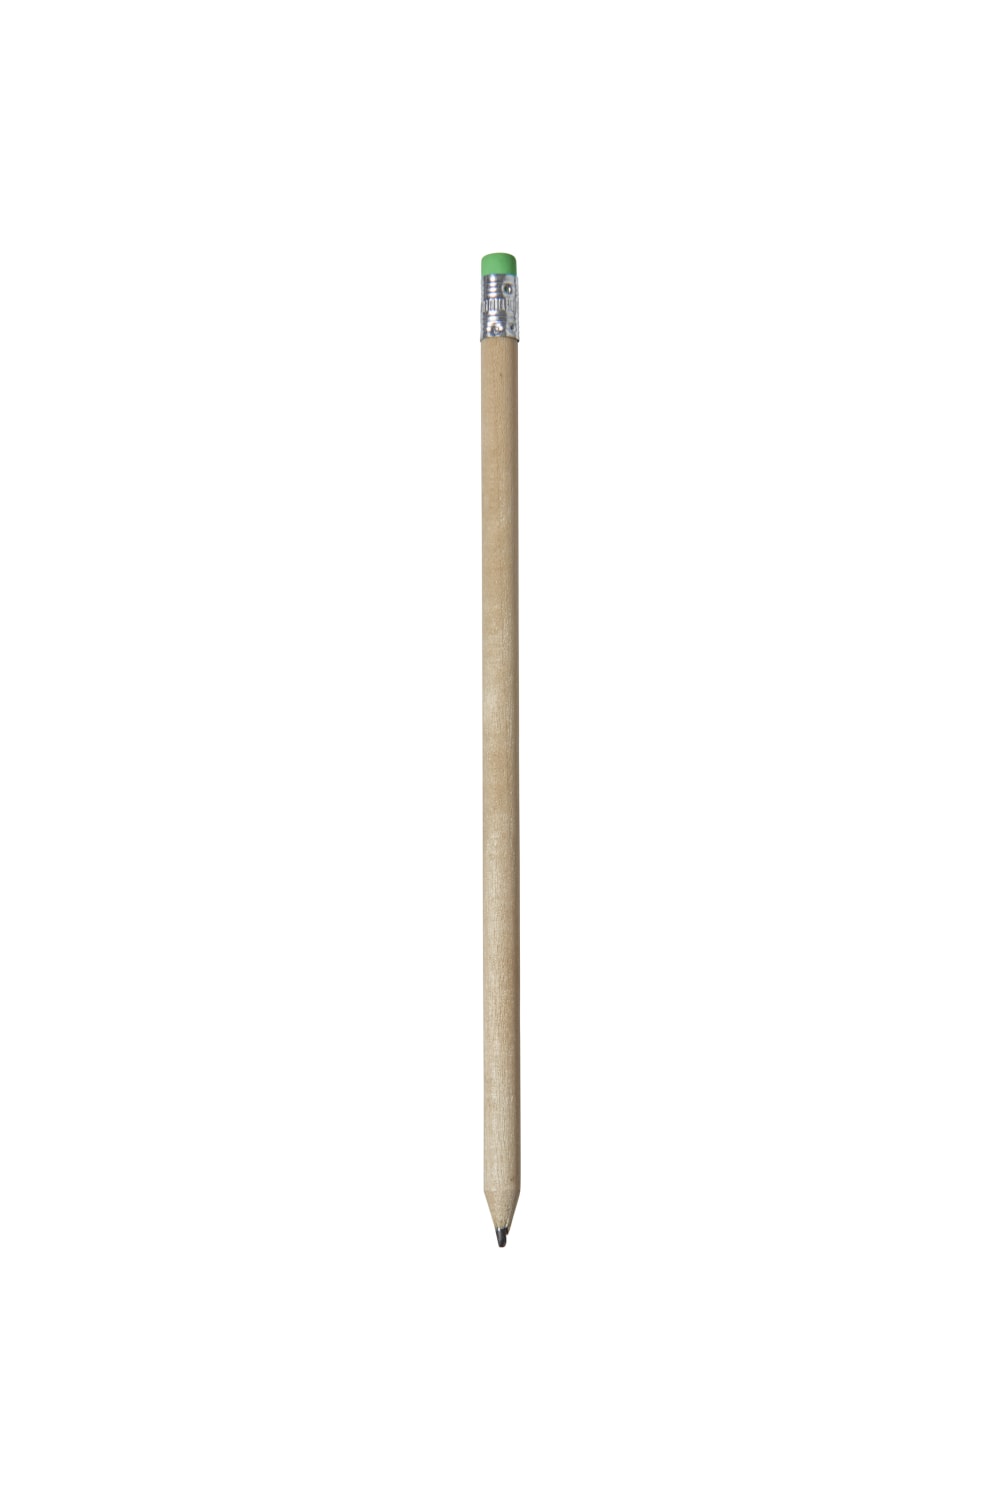 Bullet Cay Pencil (Green) (7.5 x 0.3 inches)